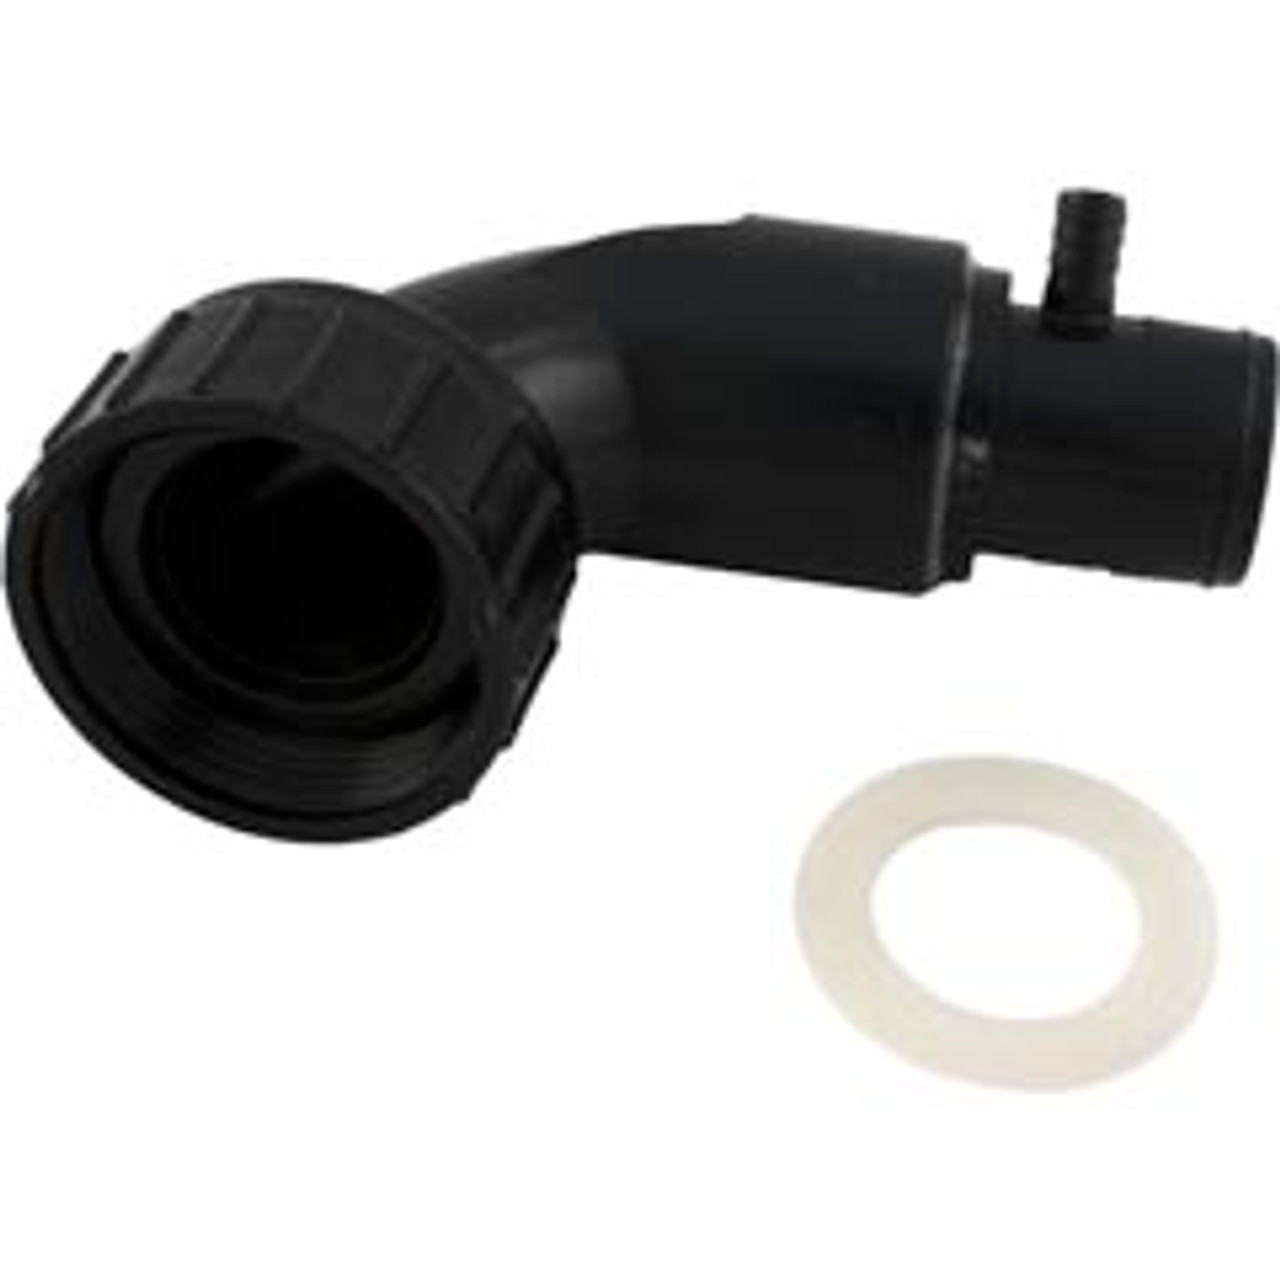 Waterway, 550-1841, BaquaPure, Clearwater, Carefree, Return Sweep Assembly, FREE SHIPPING, 742-138 , 550-1841B , 621742 , 806105099839 , WW5501841B, 80610509983, 806105099839
